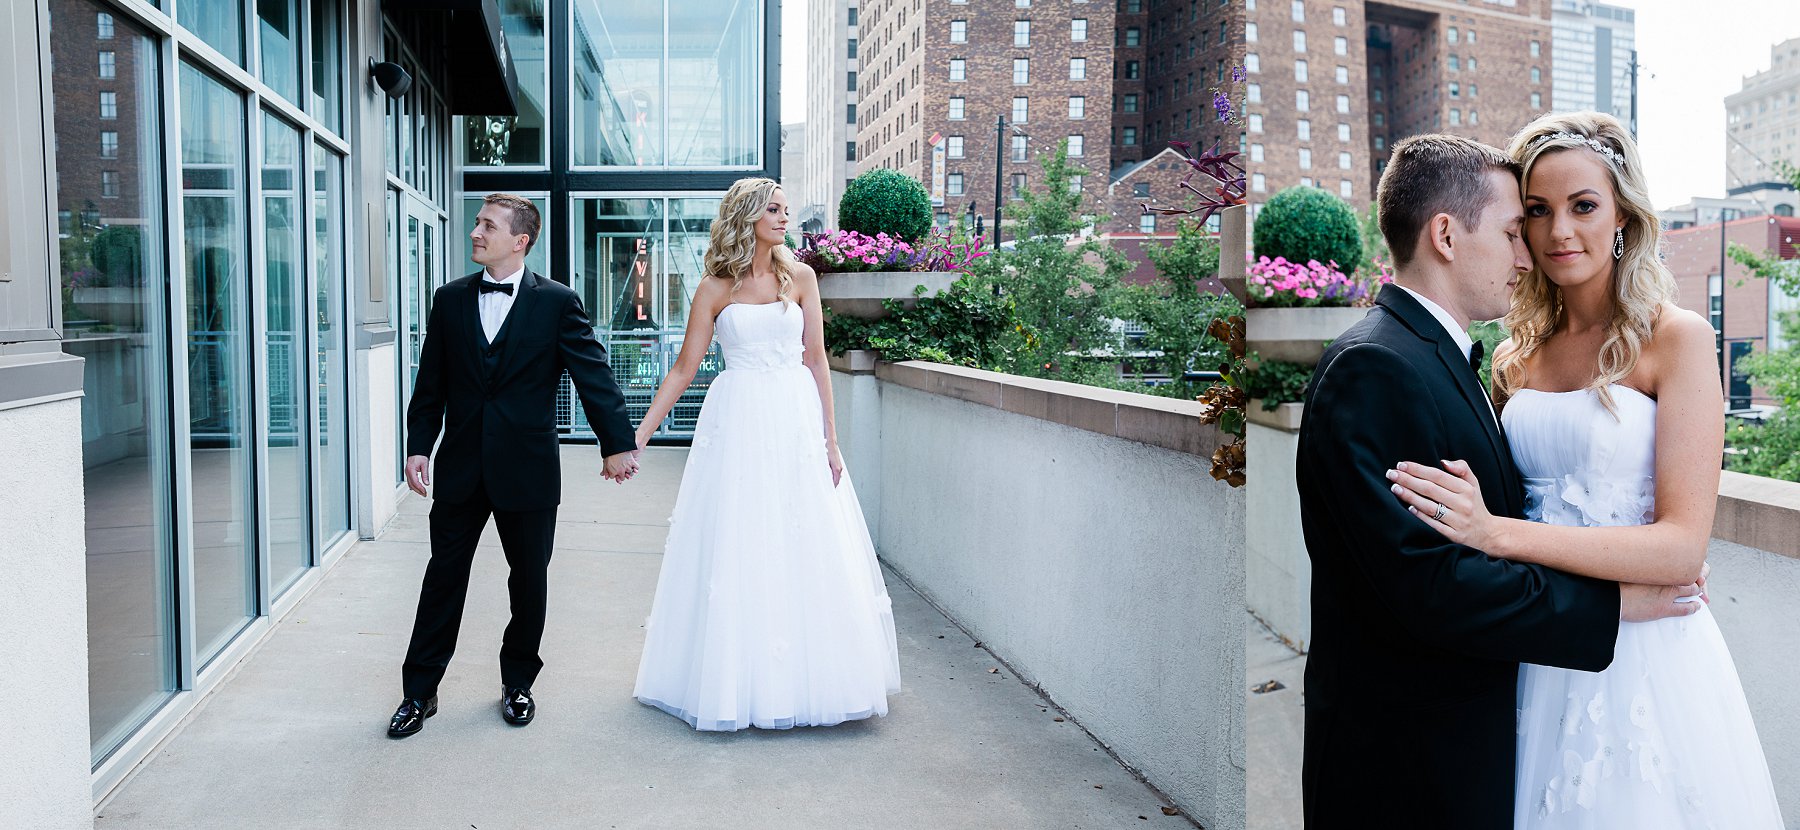 Bride and Groom portrait on balcony by Merry Ohler | Best Midwest Wedding Photographer